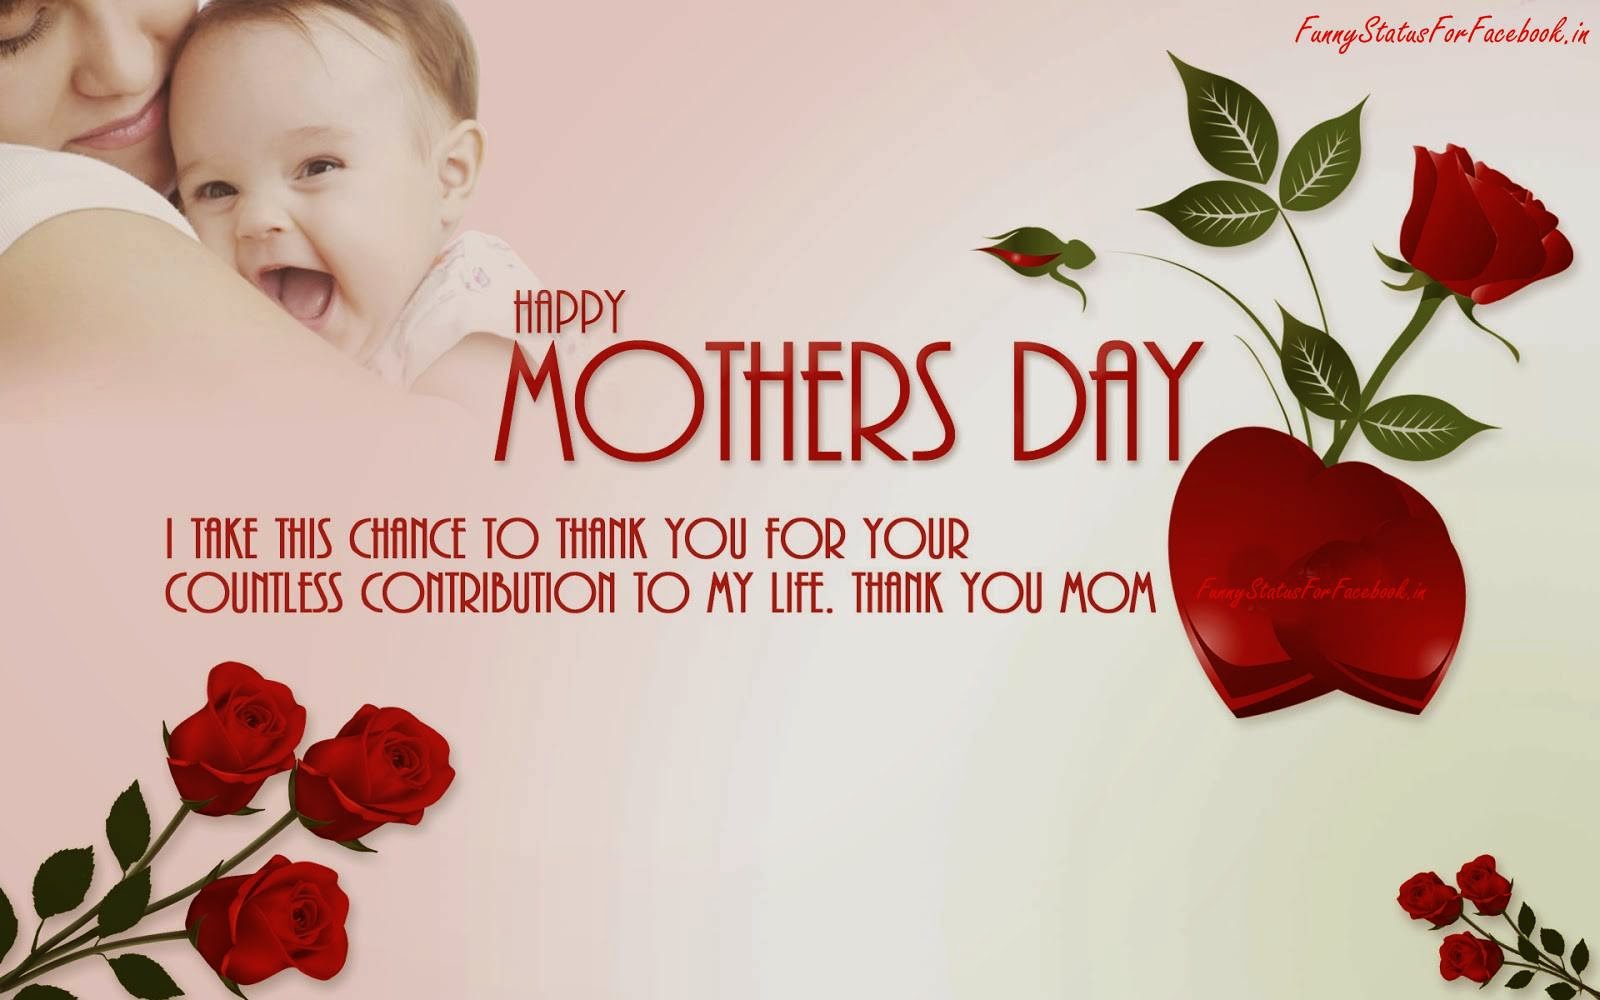 Happy Mothers Day Quotes Greeting Cards Wallpapers with Messages | Best